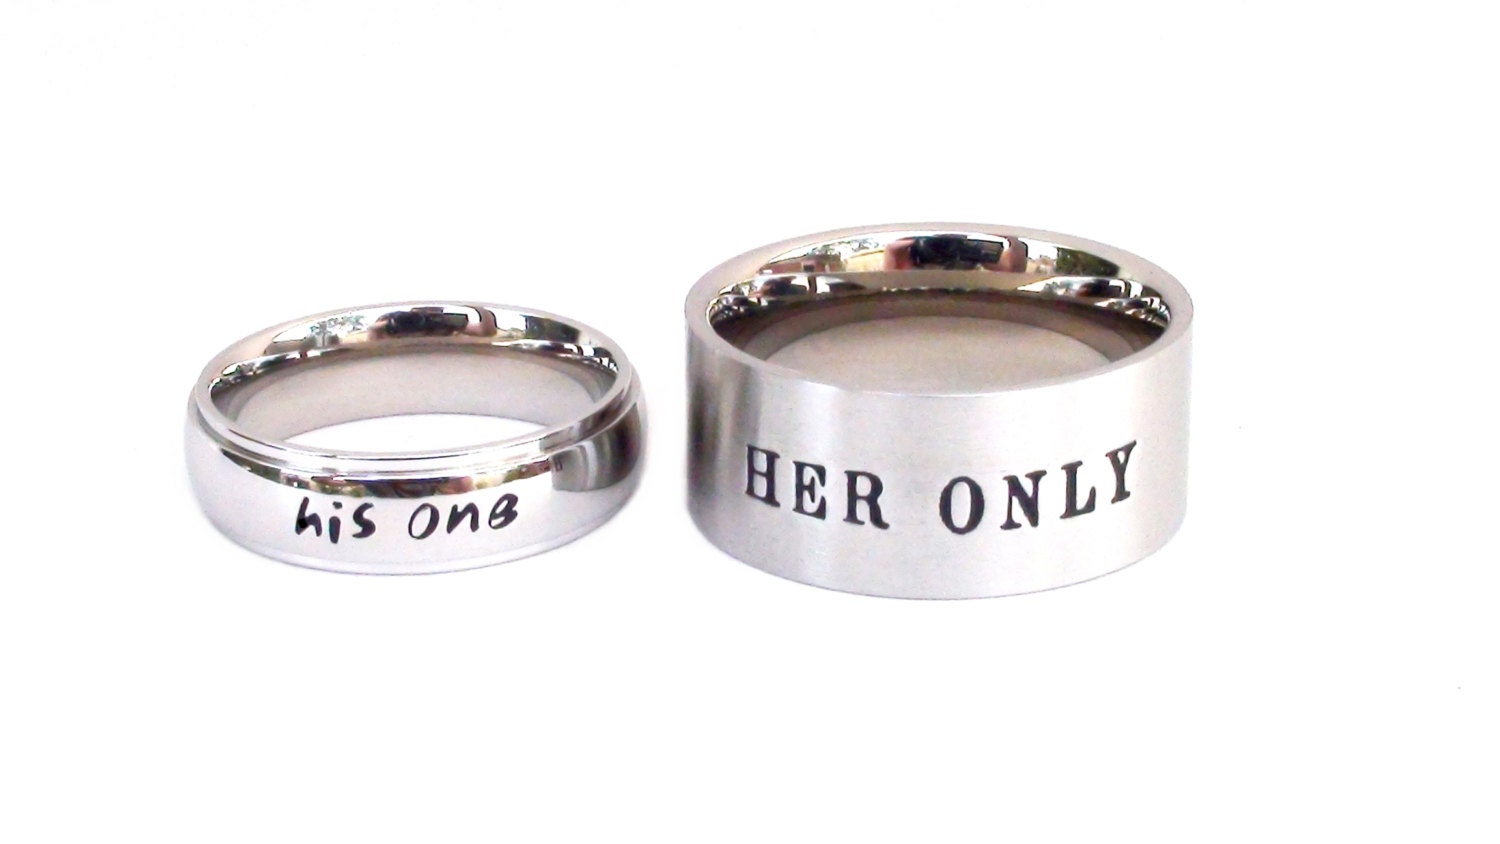 Couples Rings His one HER ONLY Two Hand Stamped Rings